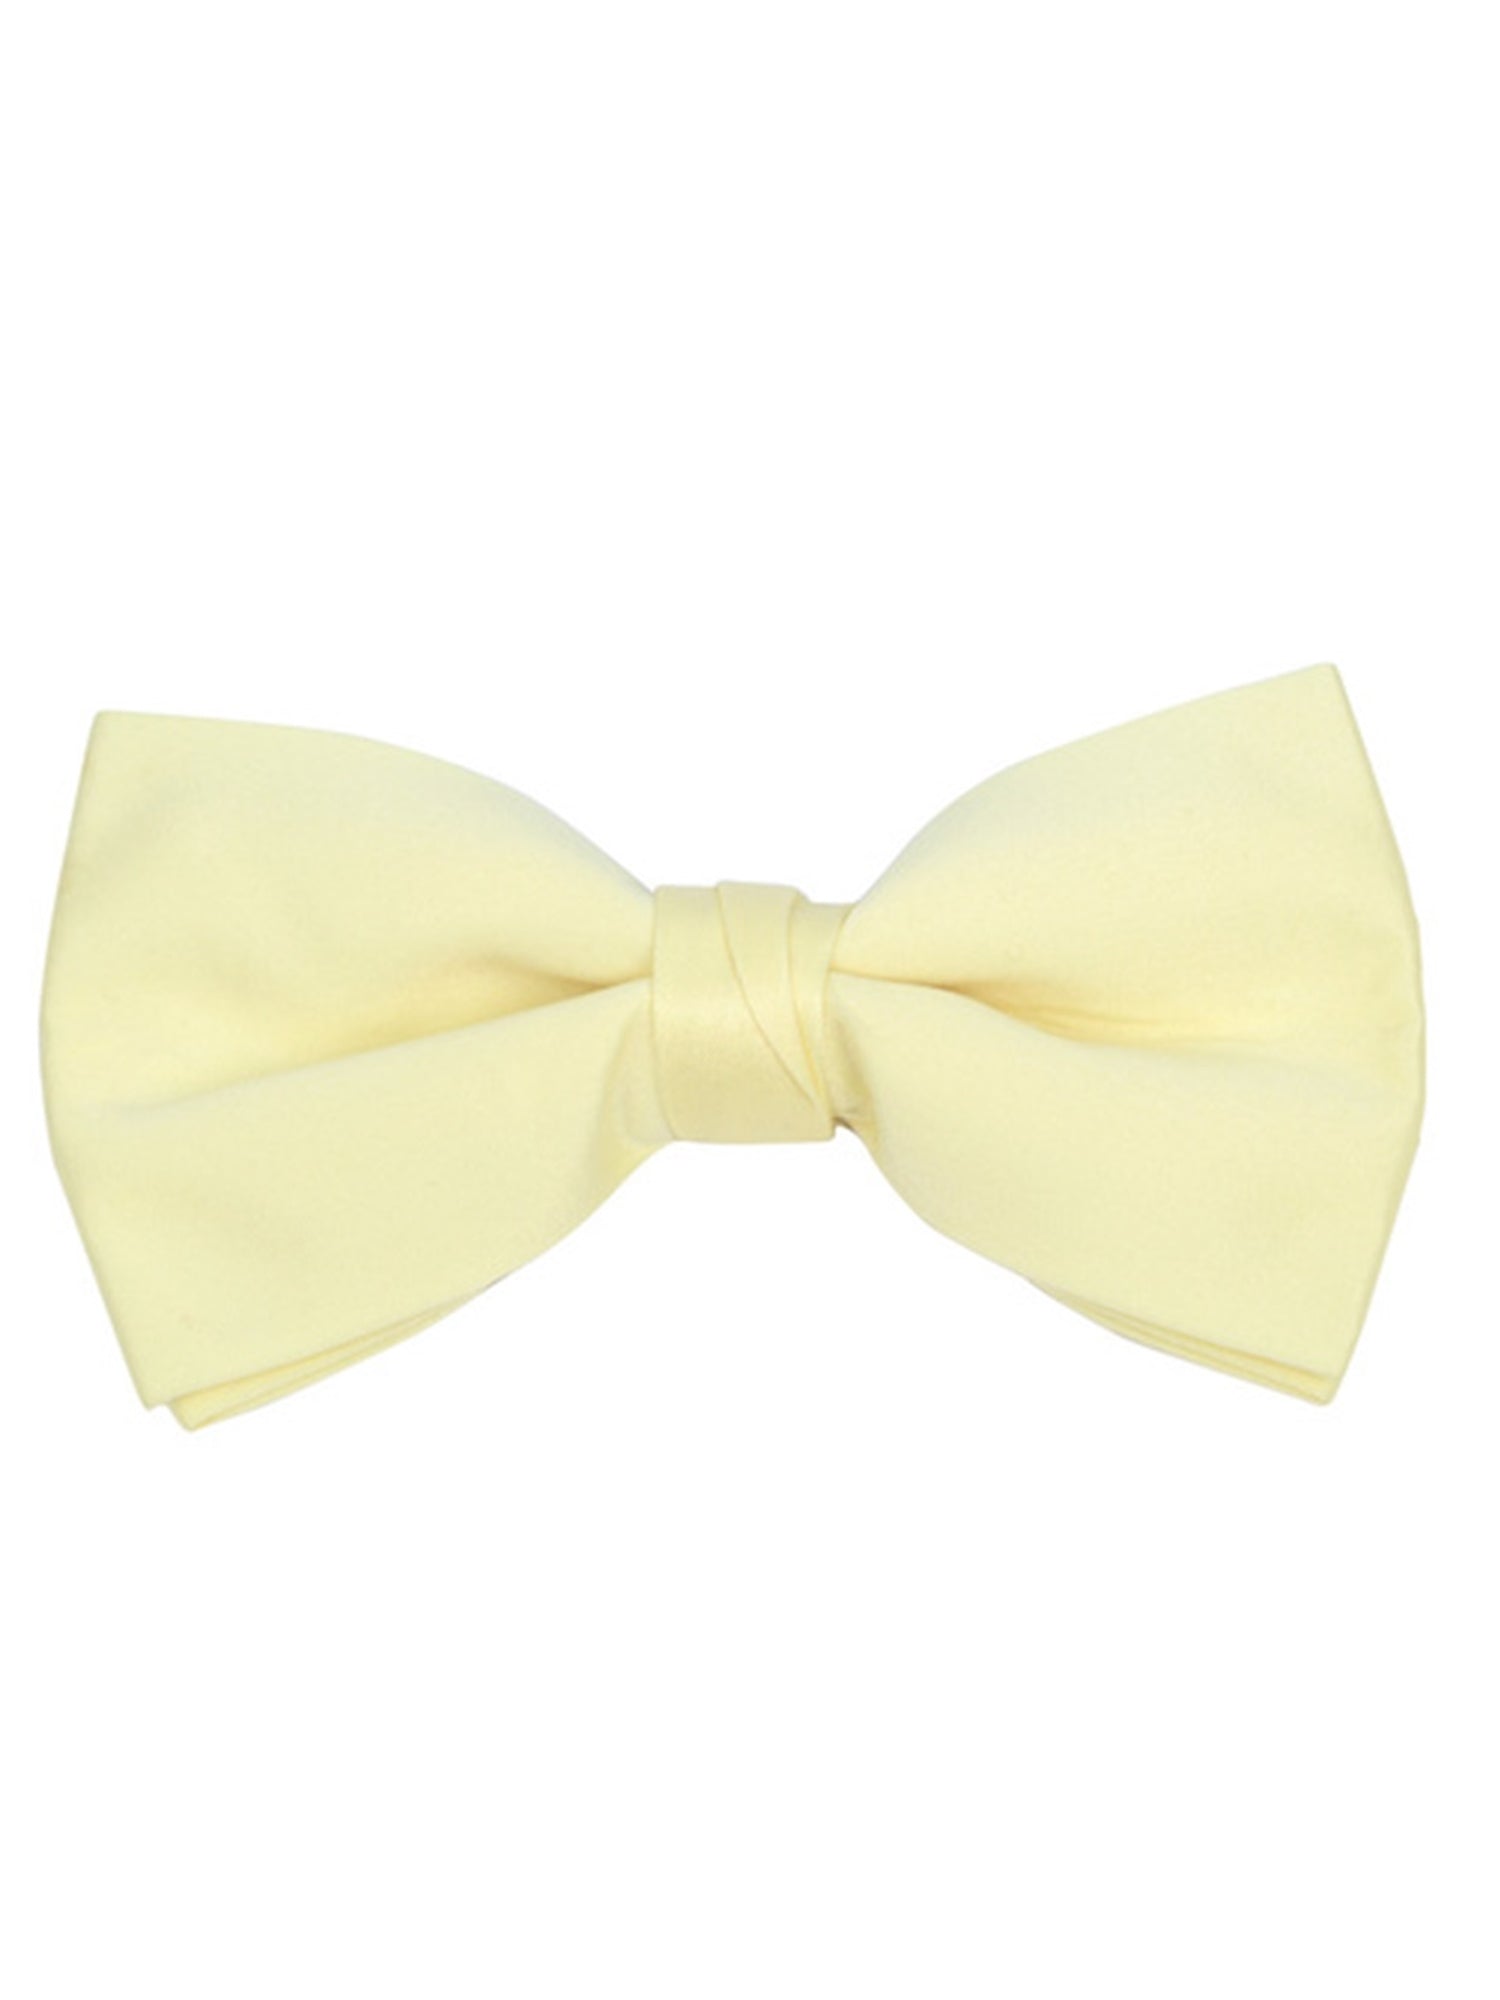 Men's Pre-tied Adjustable Length Bow Tie - Formal Tuxedo Solid Color Men's Solid Color Bow Tie TheDapperTie Light Yellow One Size 